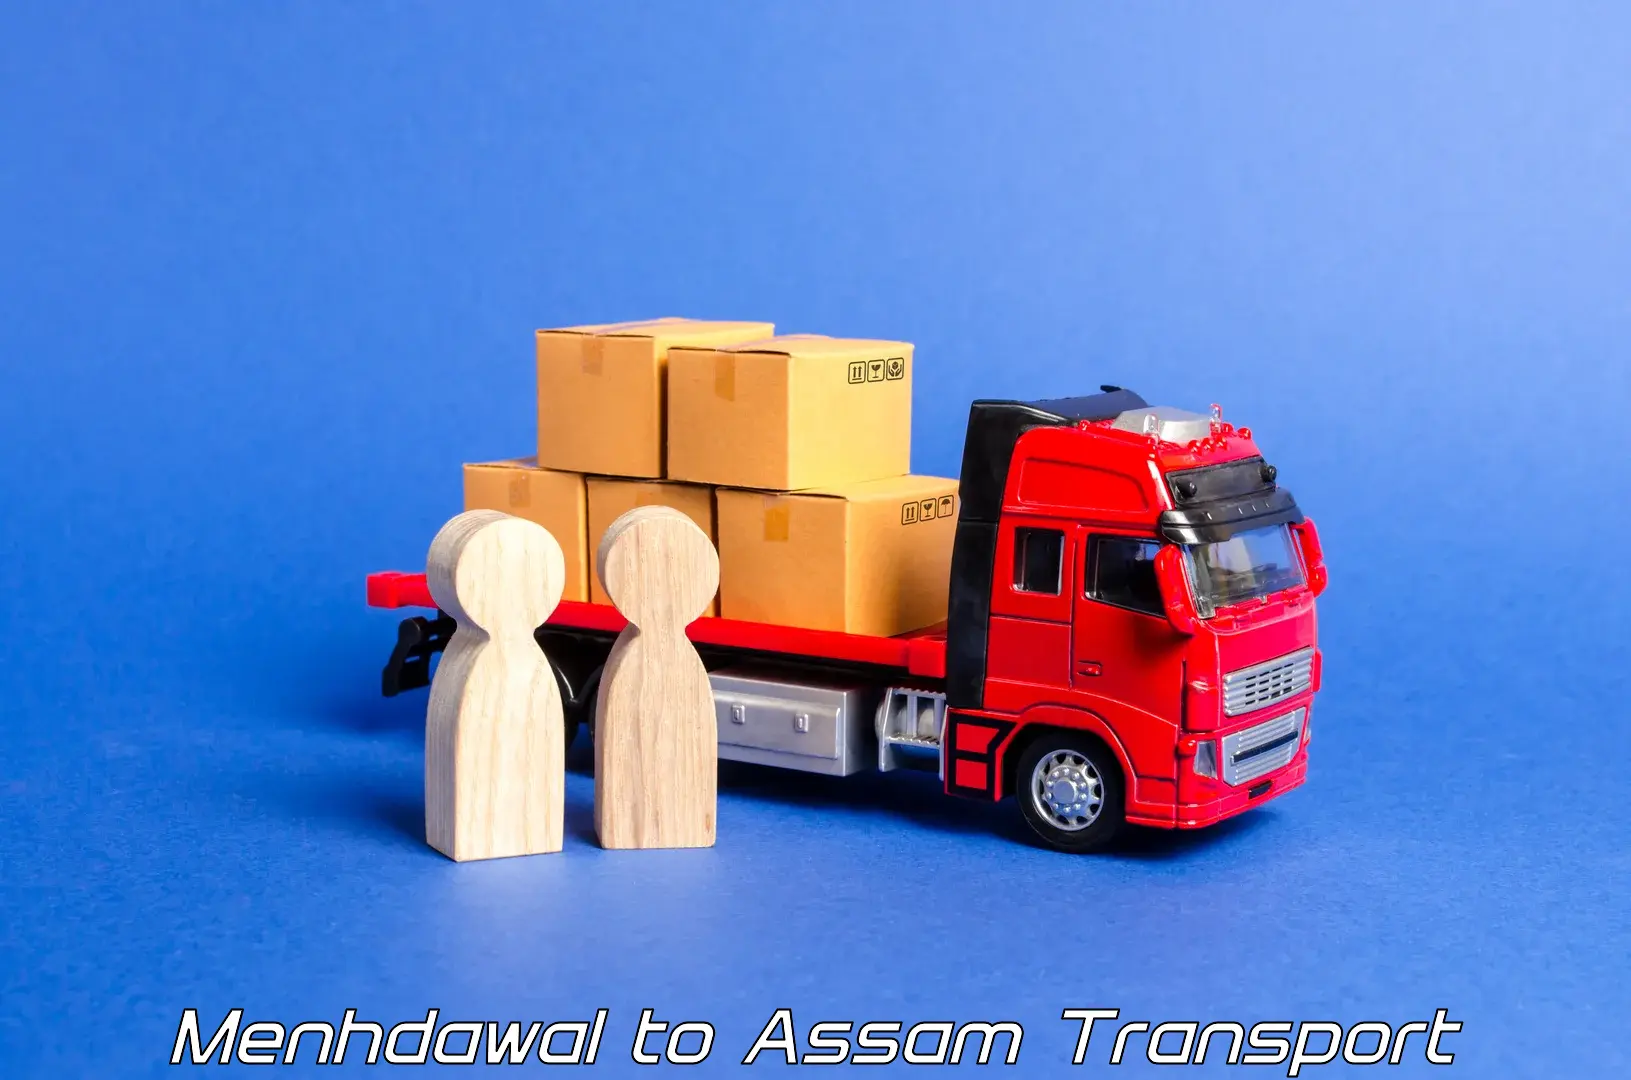 Nearby transport service Menhdawal to Dhupdhara